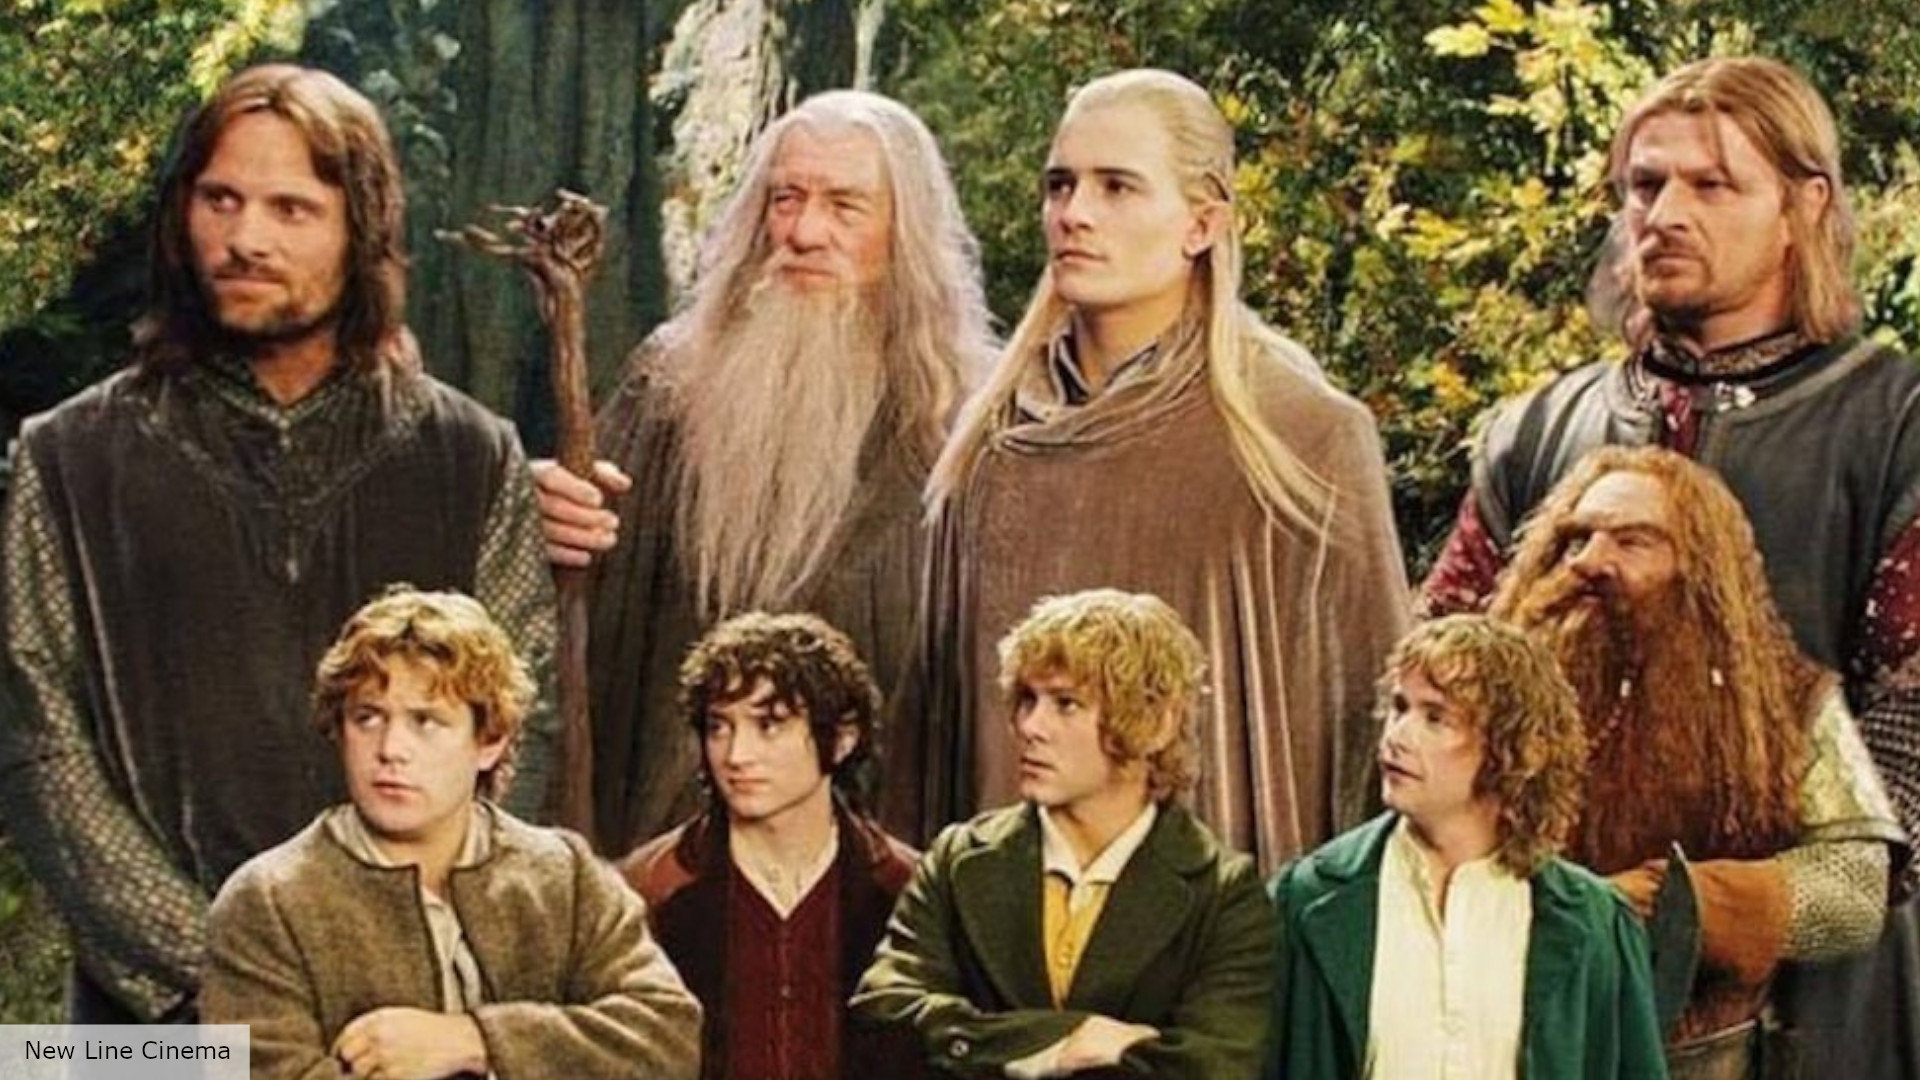 Watch 'The Lord of the Rings' movies and series in chronological order